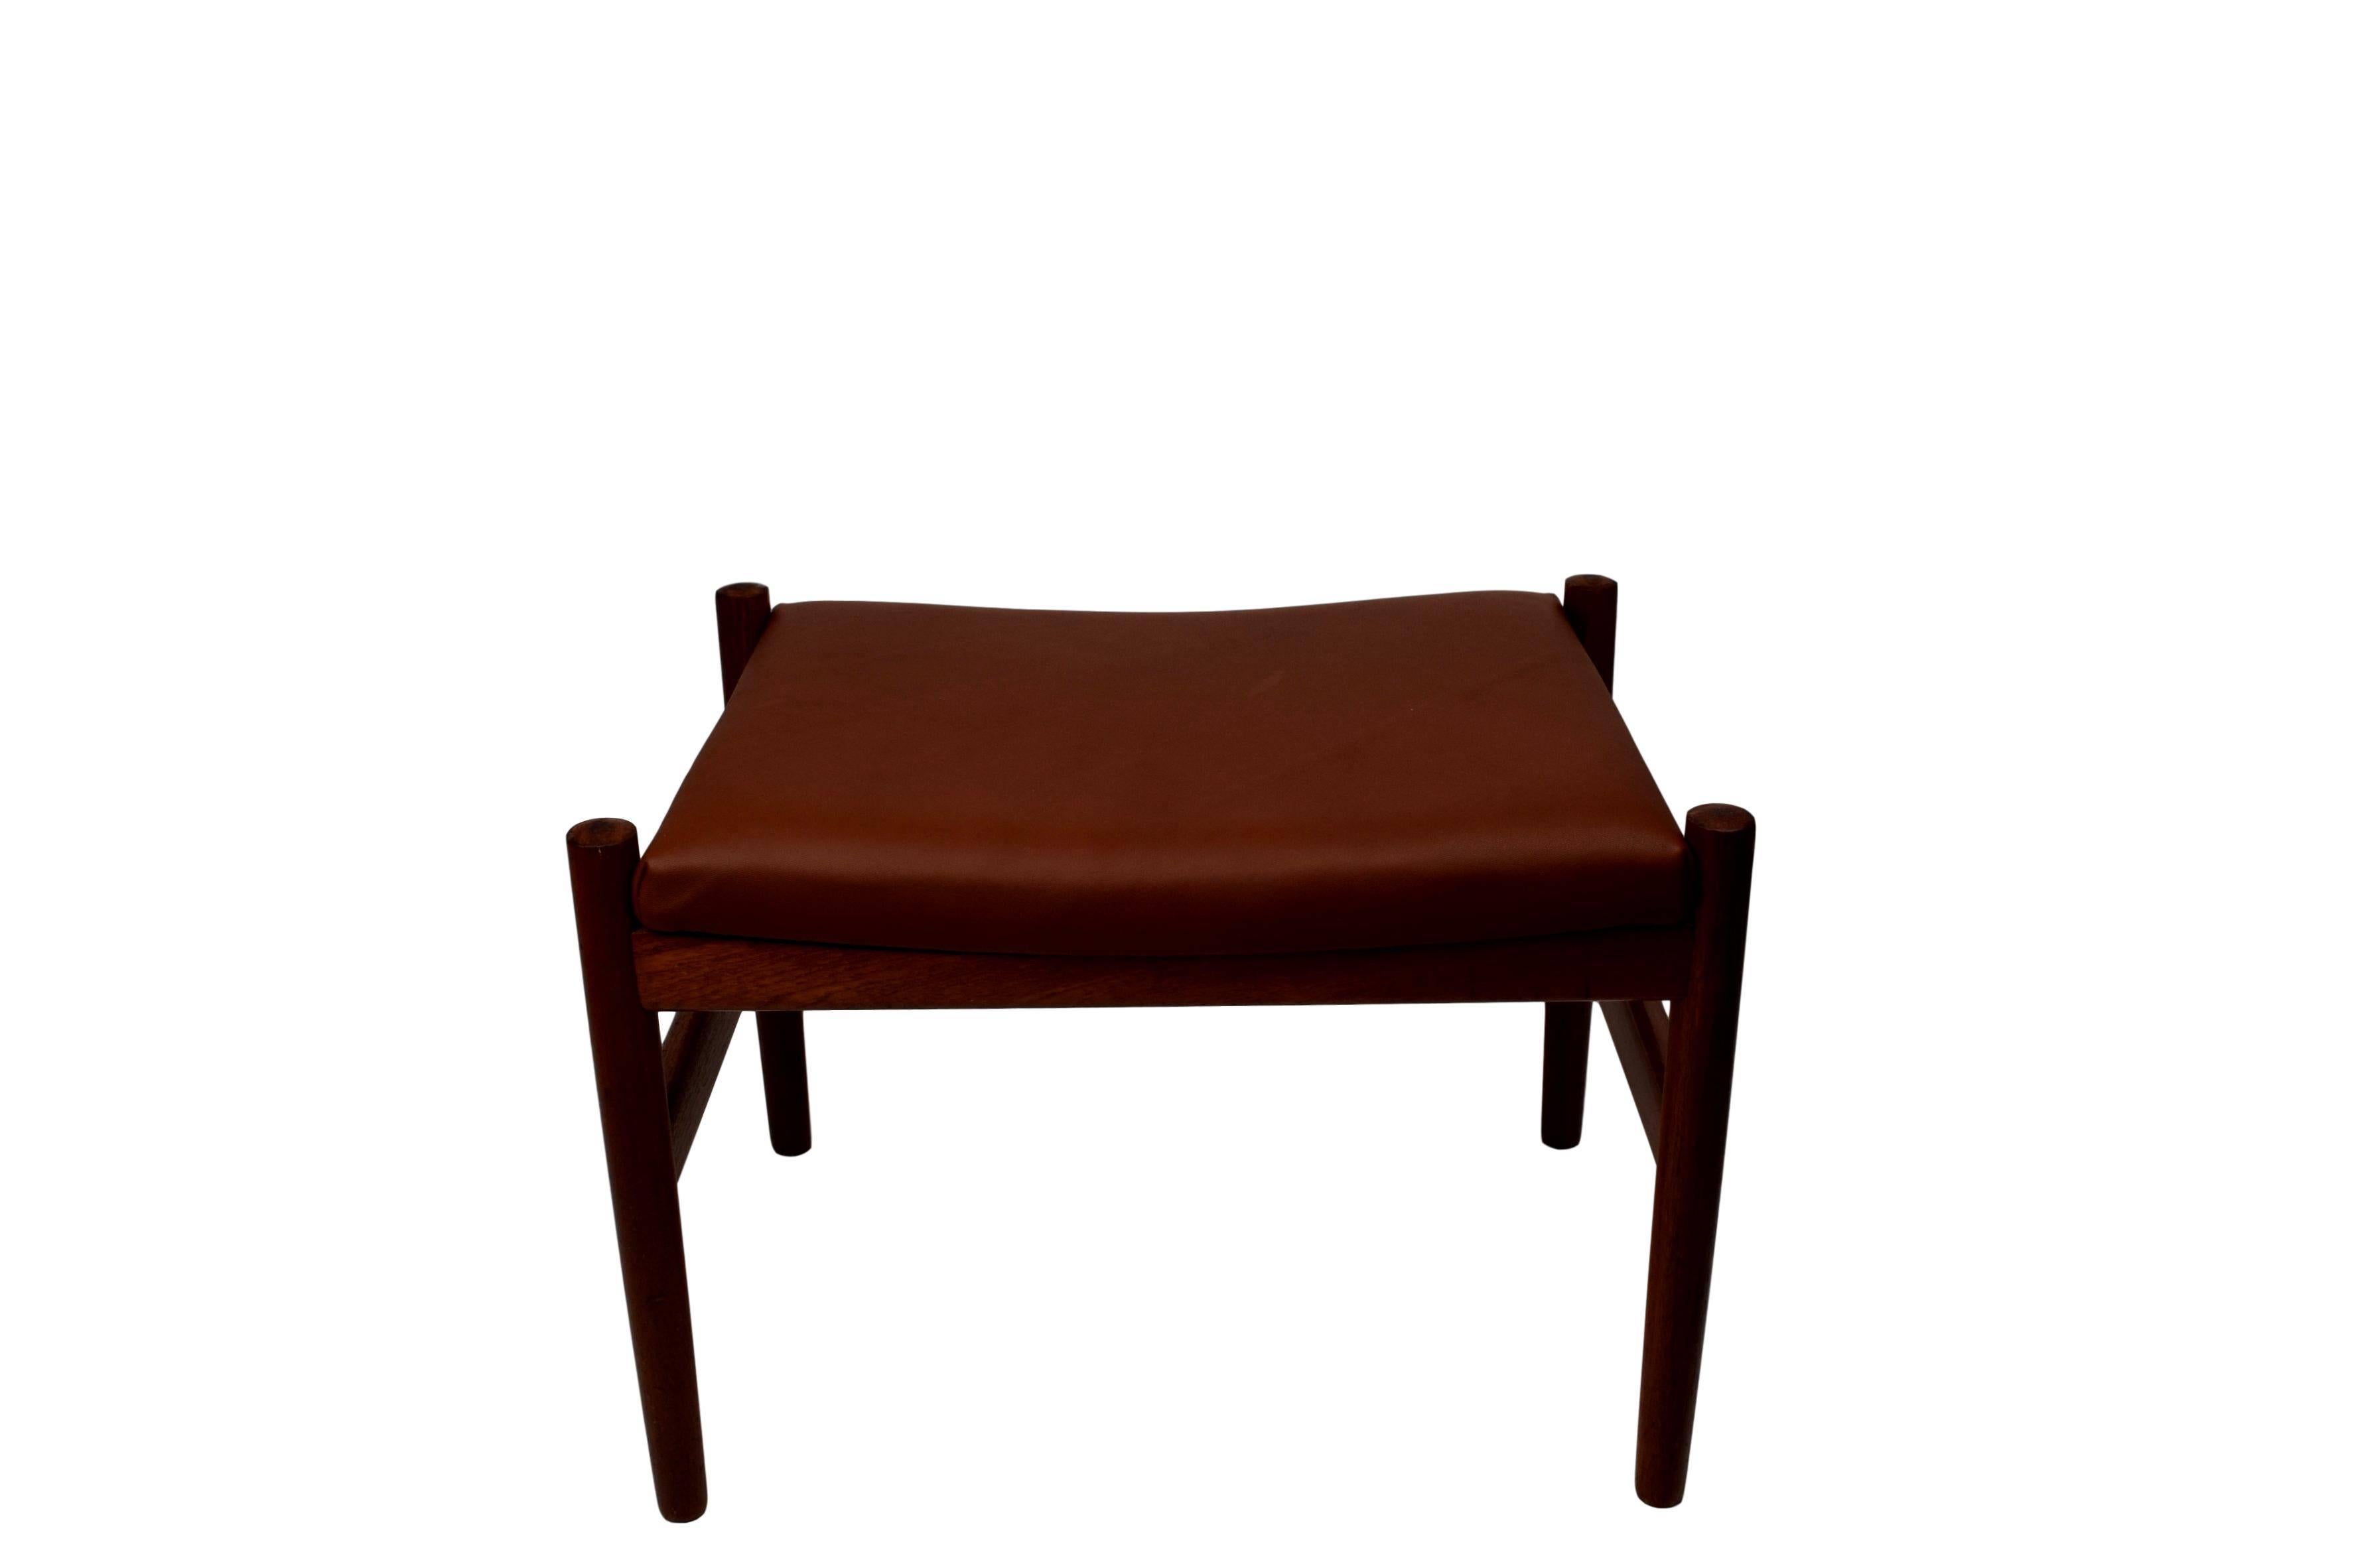 Mid-20th Century Danish Midcentury Teak Ottoman by Spøttrup, Brown Aniline Leather, Stamped For Sale